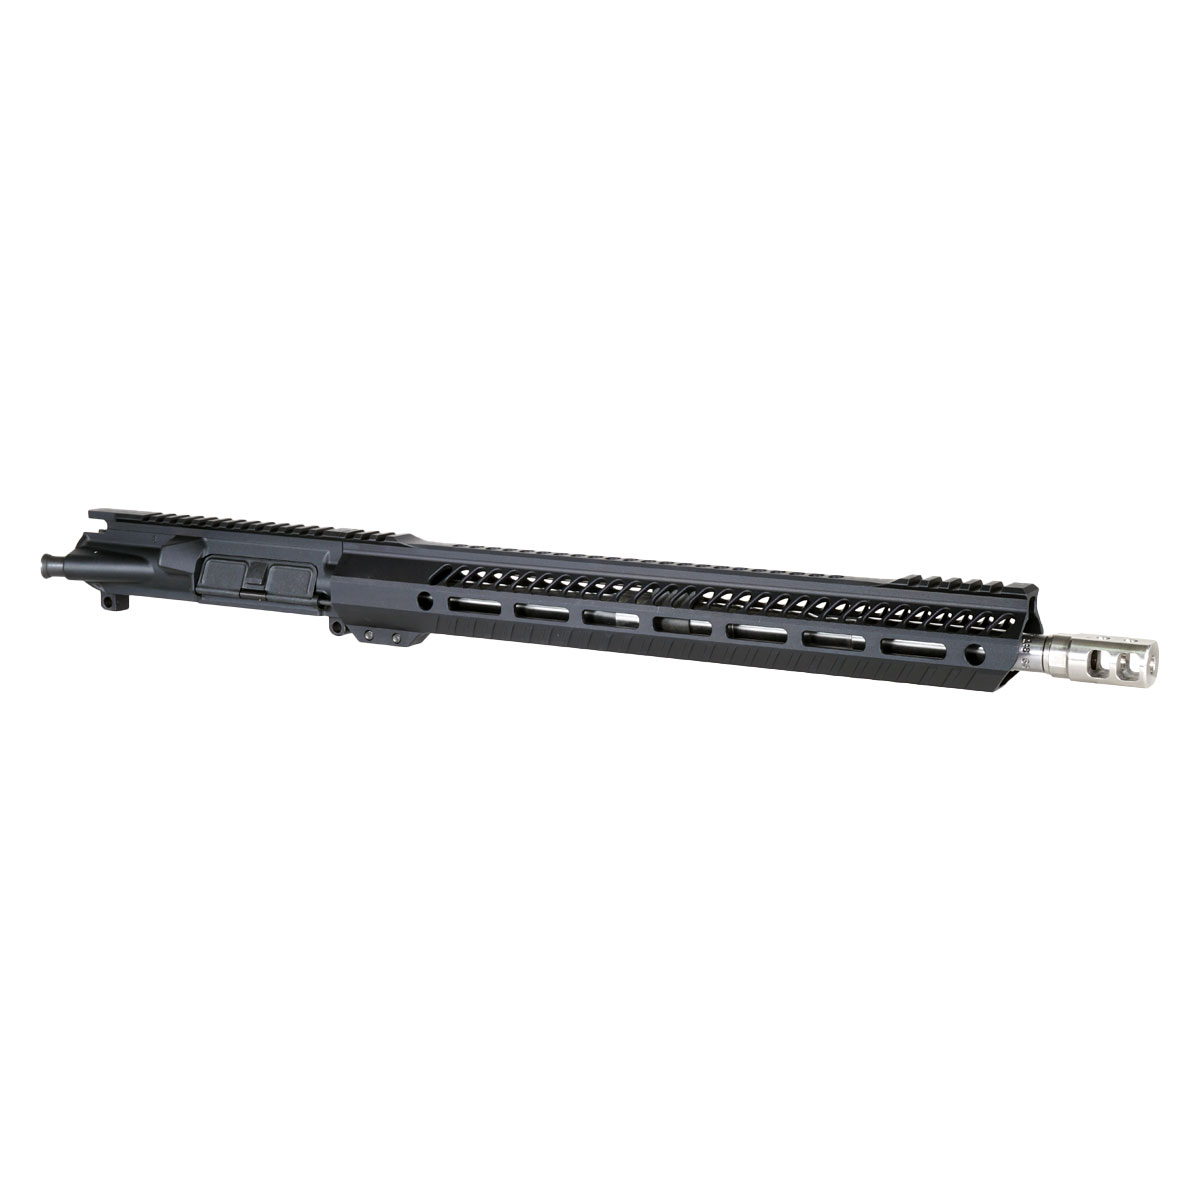 MMC 'Silver Sentinel' 16-inch AR-15 5.56 NATO Stainless Rifle Upper Build Kit